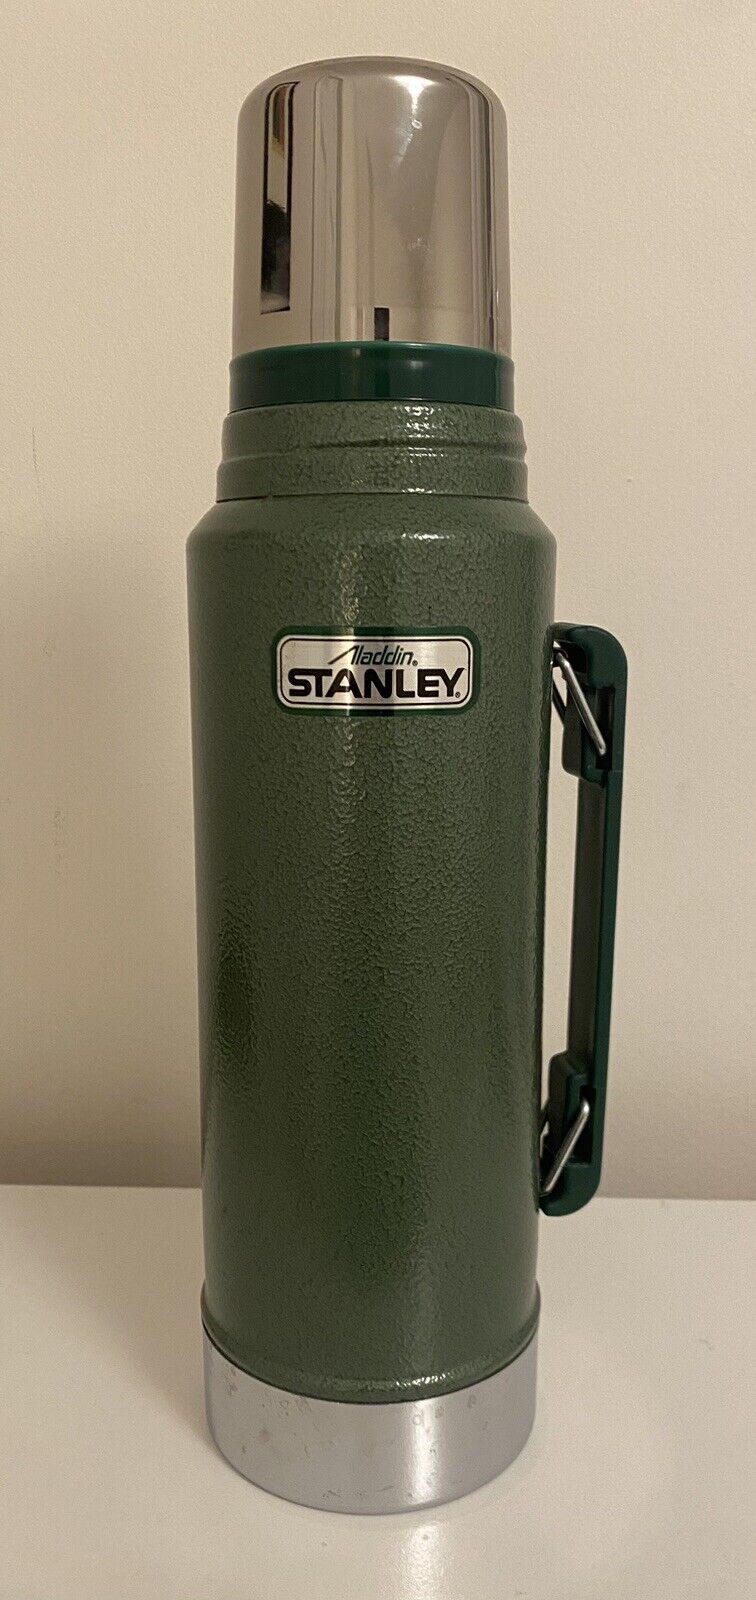 Vintage Stanley Aladdin Green Vacuum Bottle Thermos A-944DH, 1 Quart Made in USA